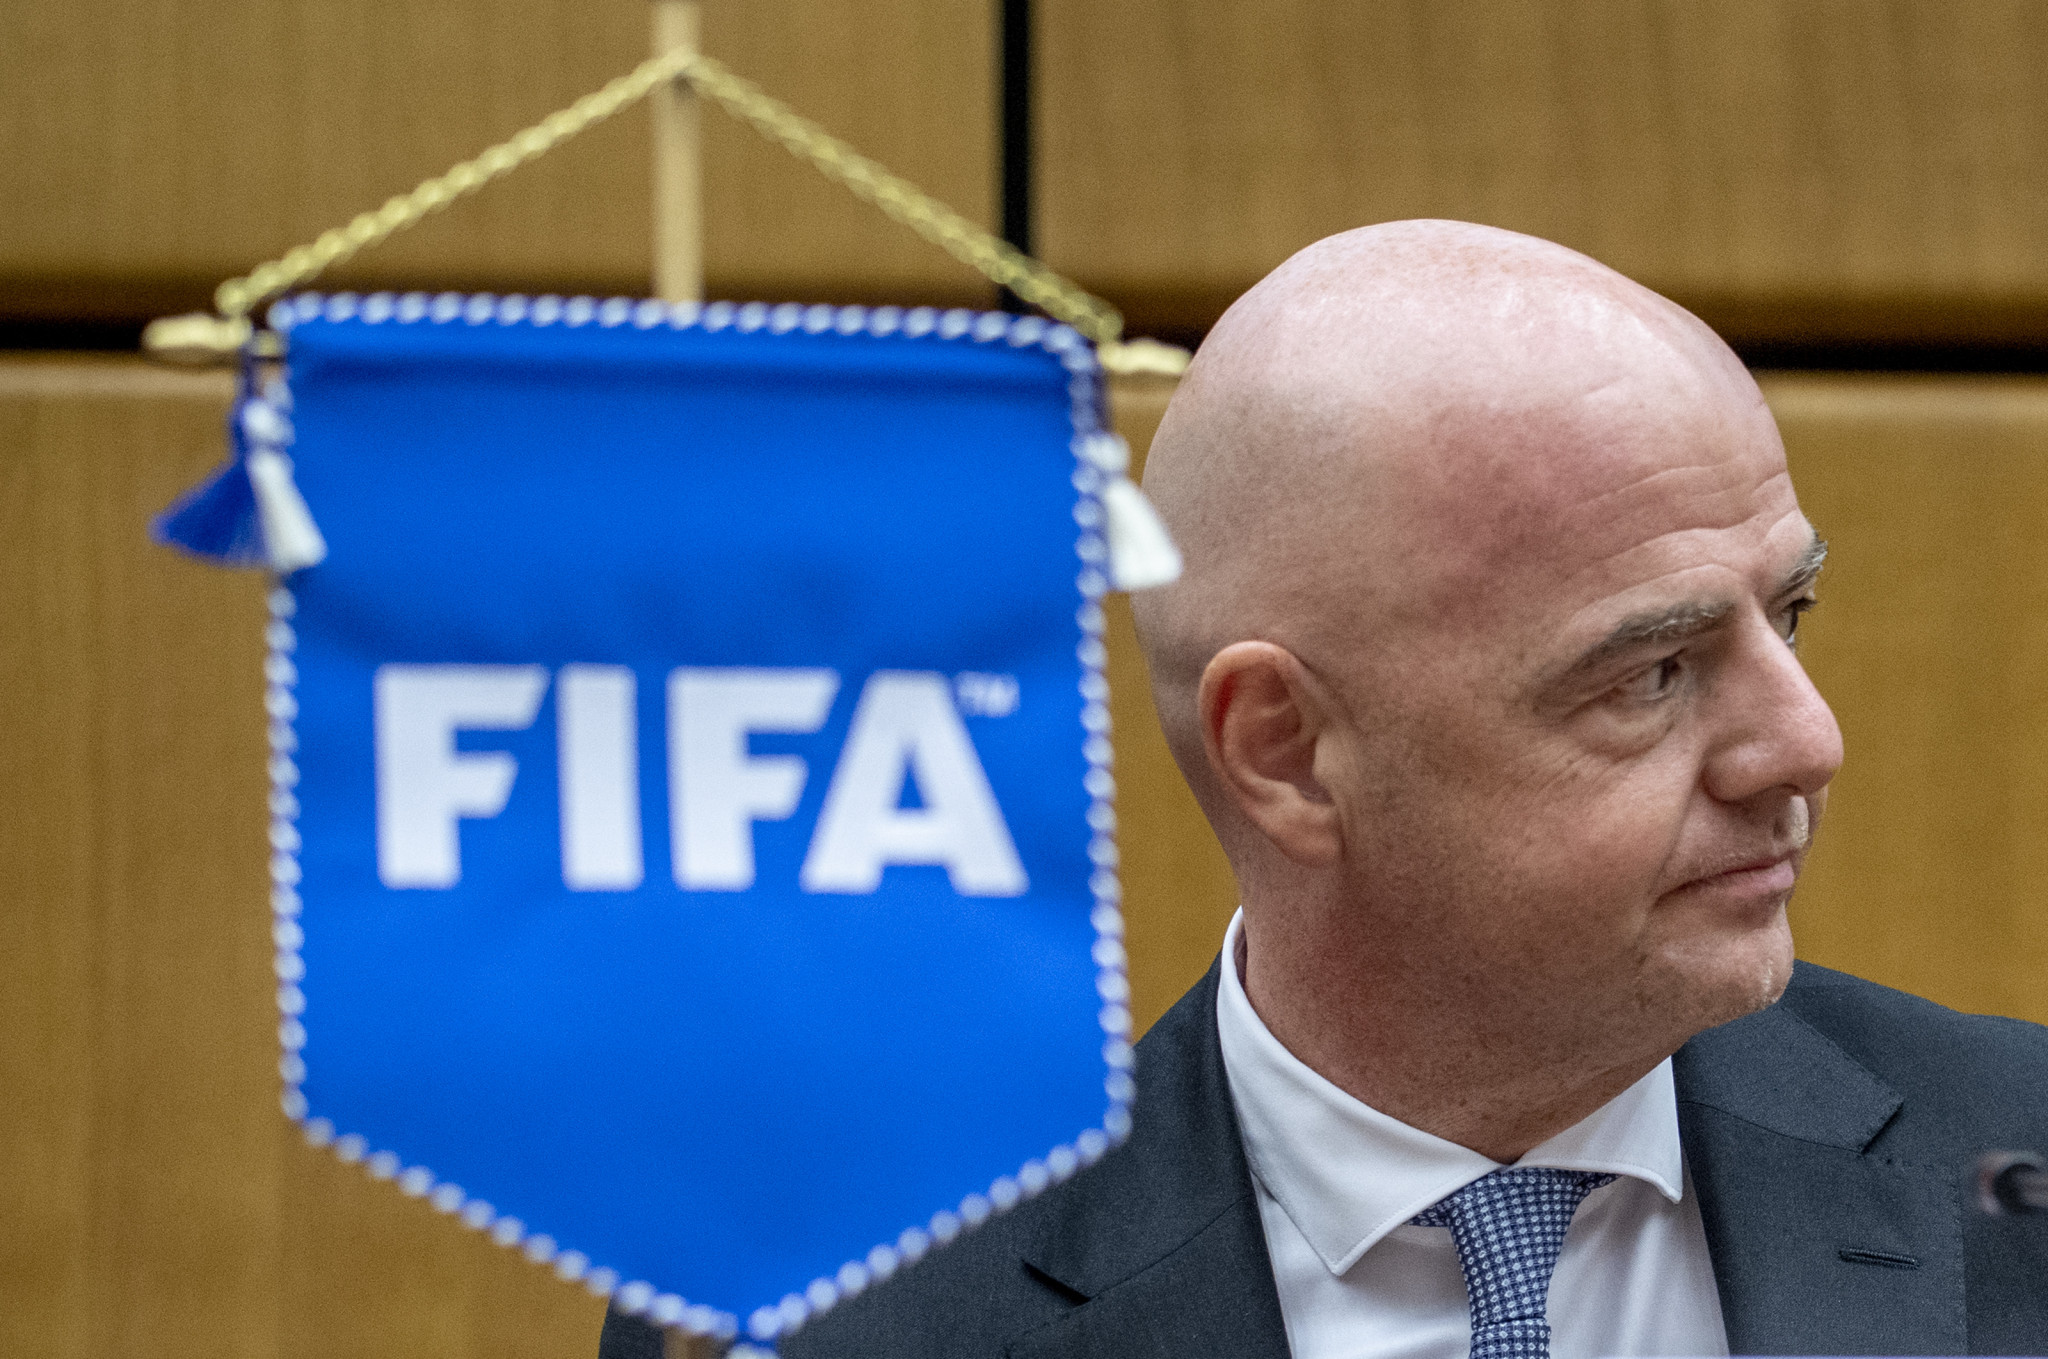 Gianni Infantino has praised the governance and compliance improvements FIFA has made under his leadership ©Getty Images